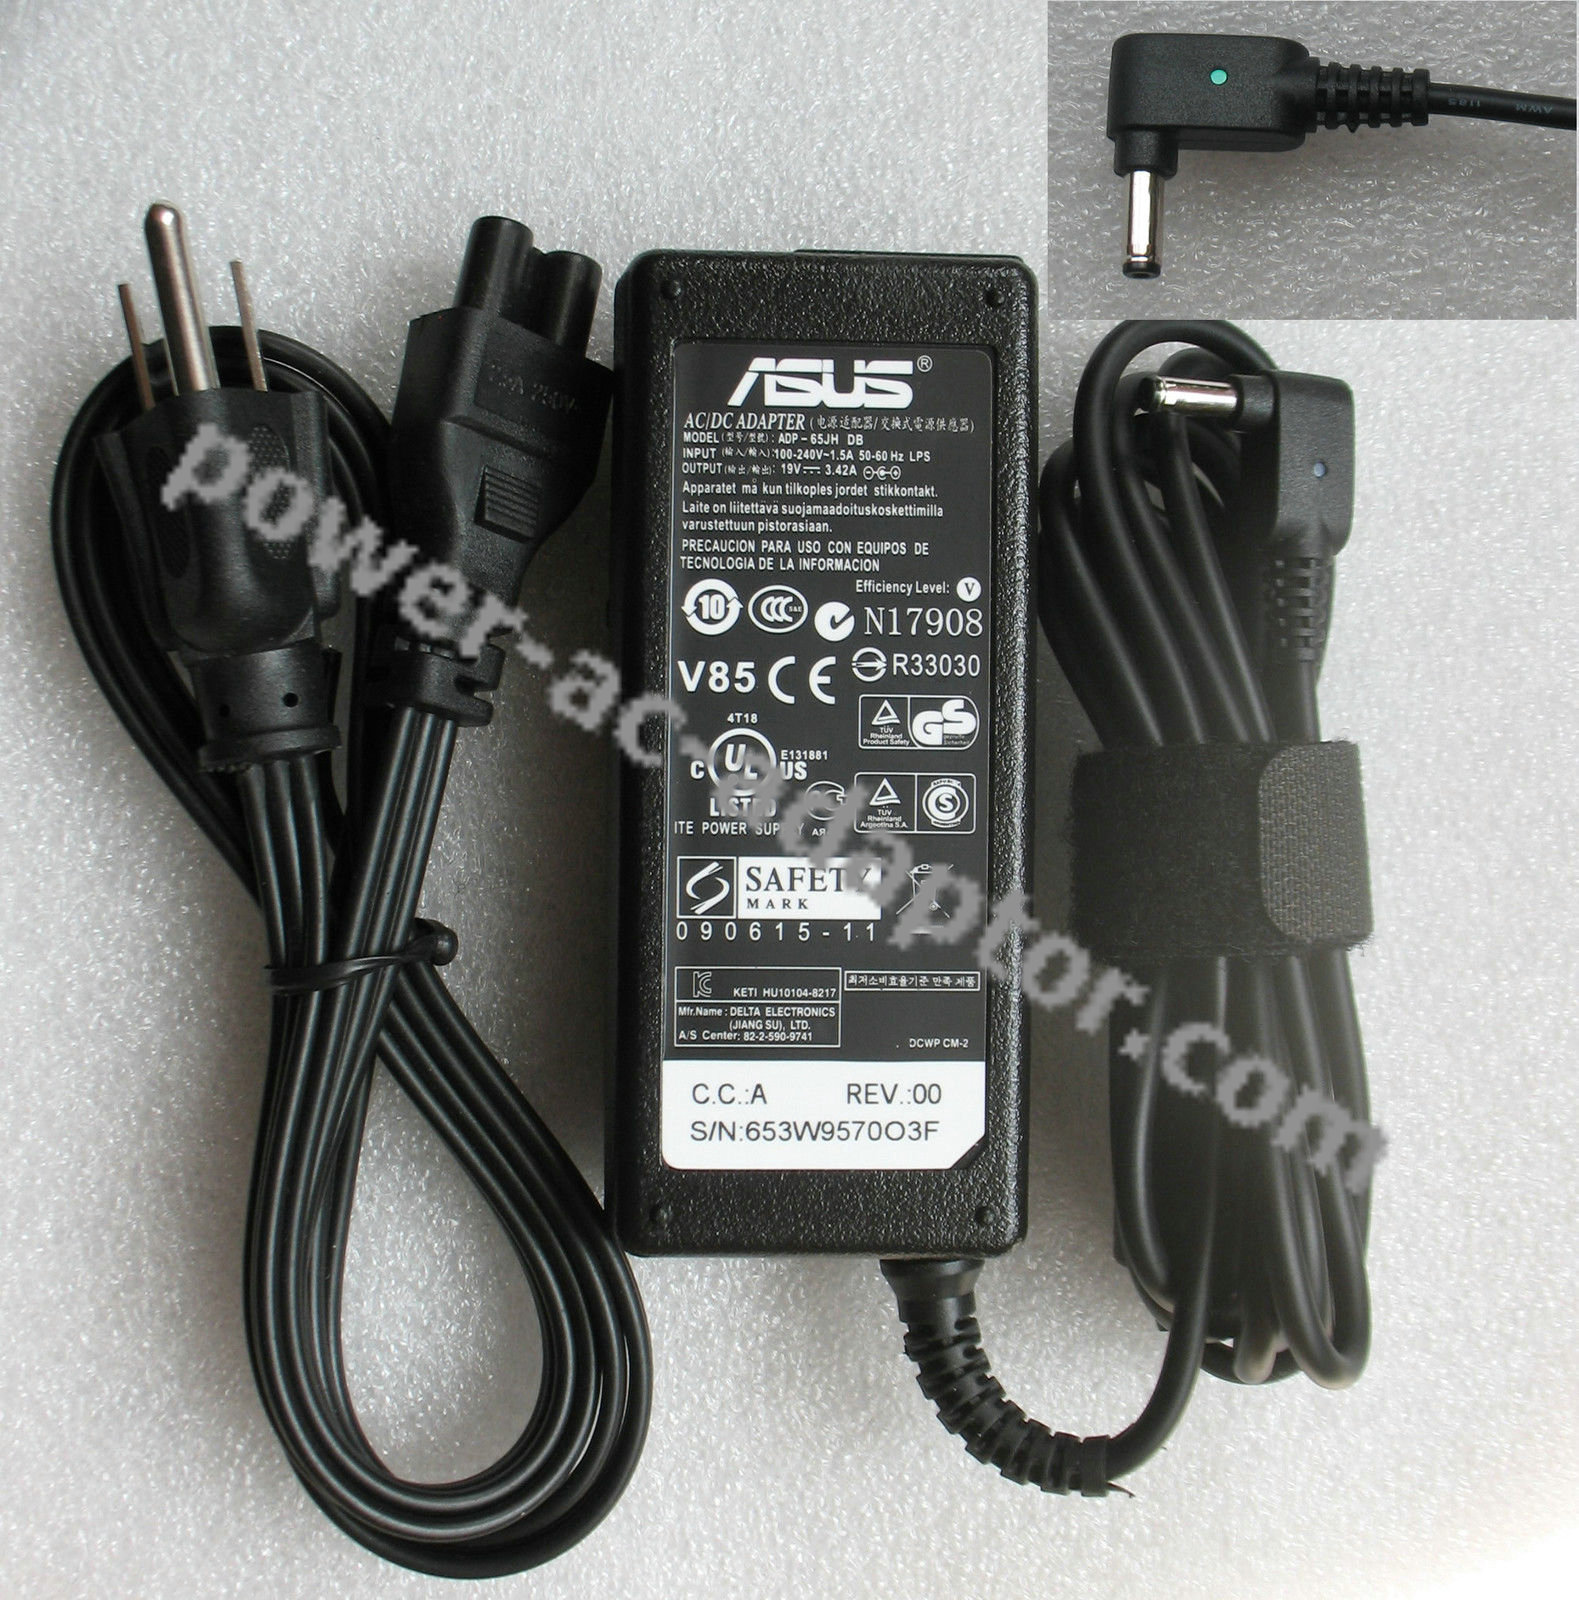 Adapter for ASUS ZenBook UX32A-DB31/i3-2367M Ultrabook